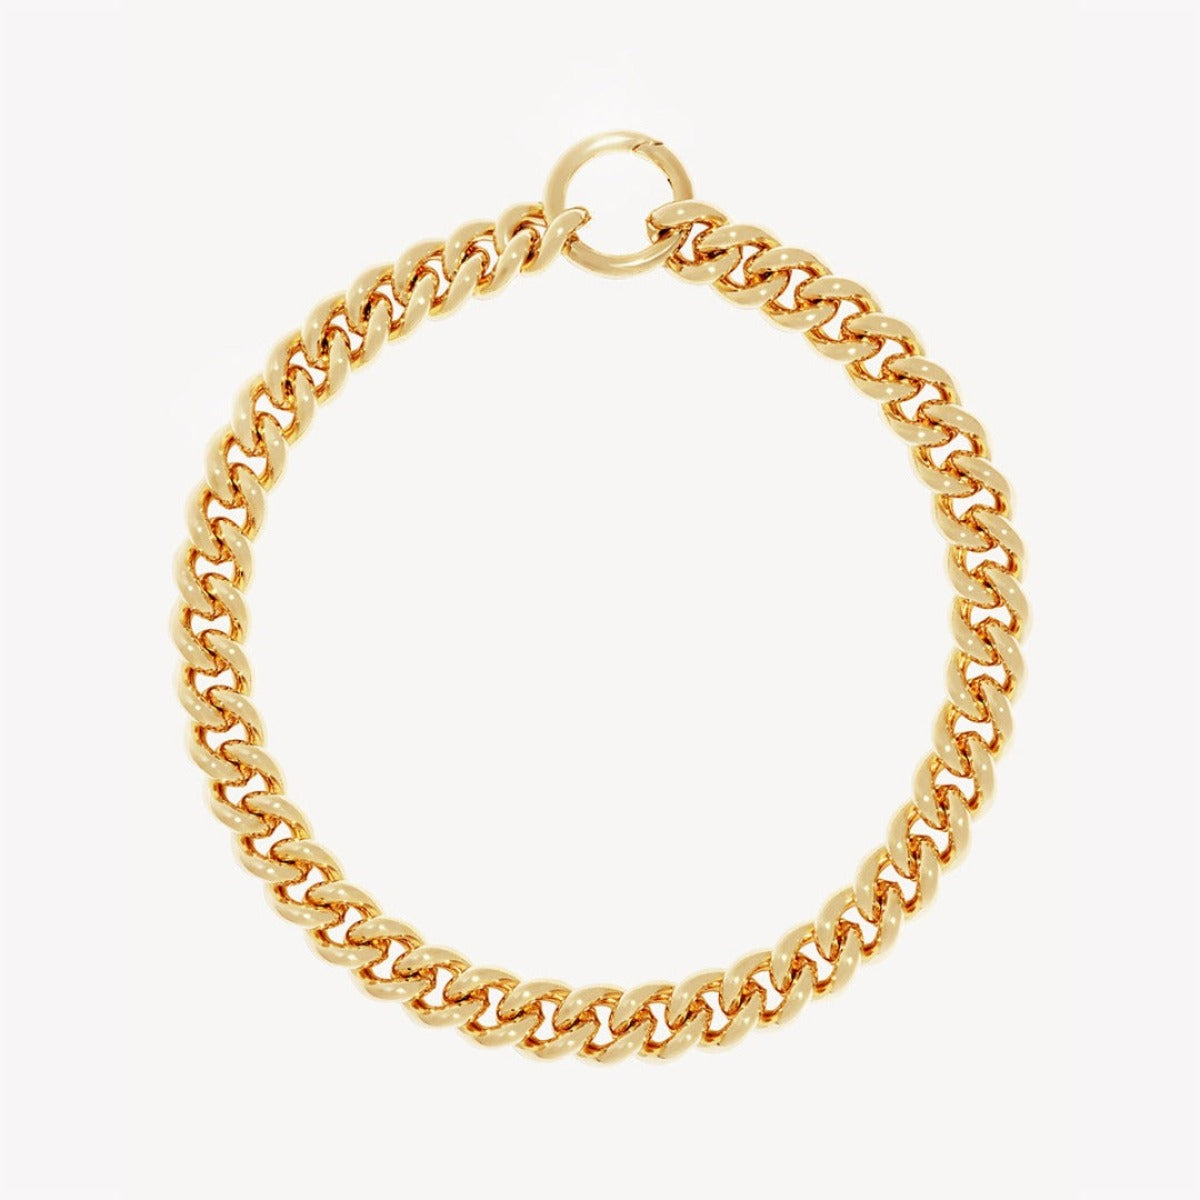 Heavy gold [plate curb chai necklace.